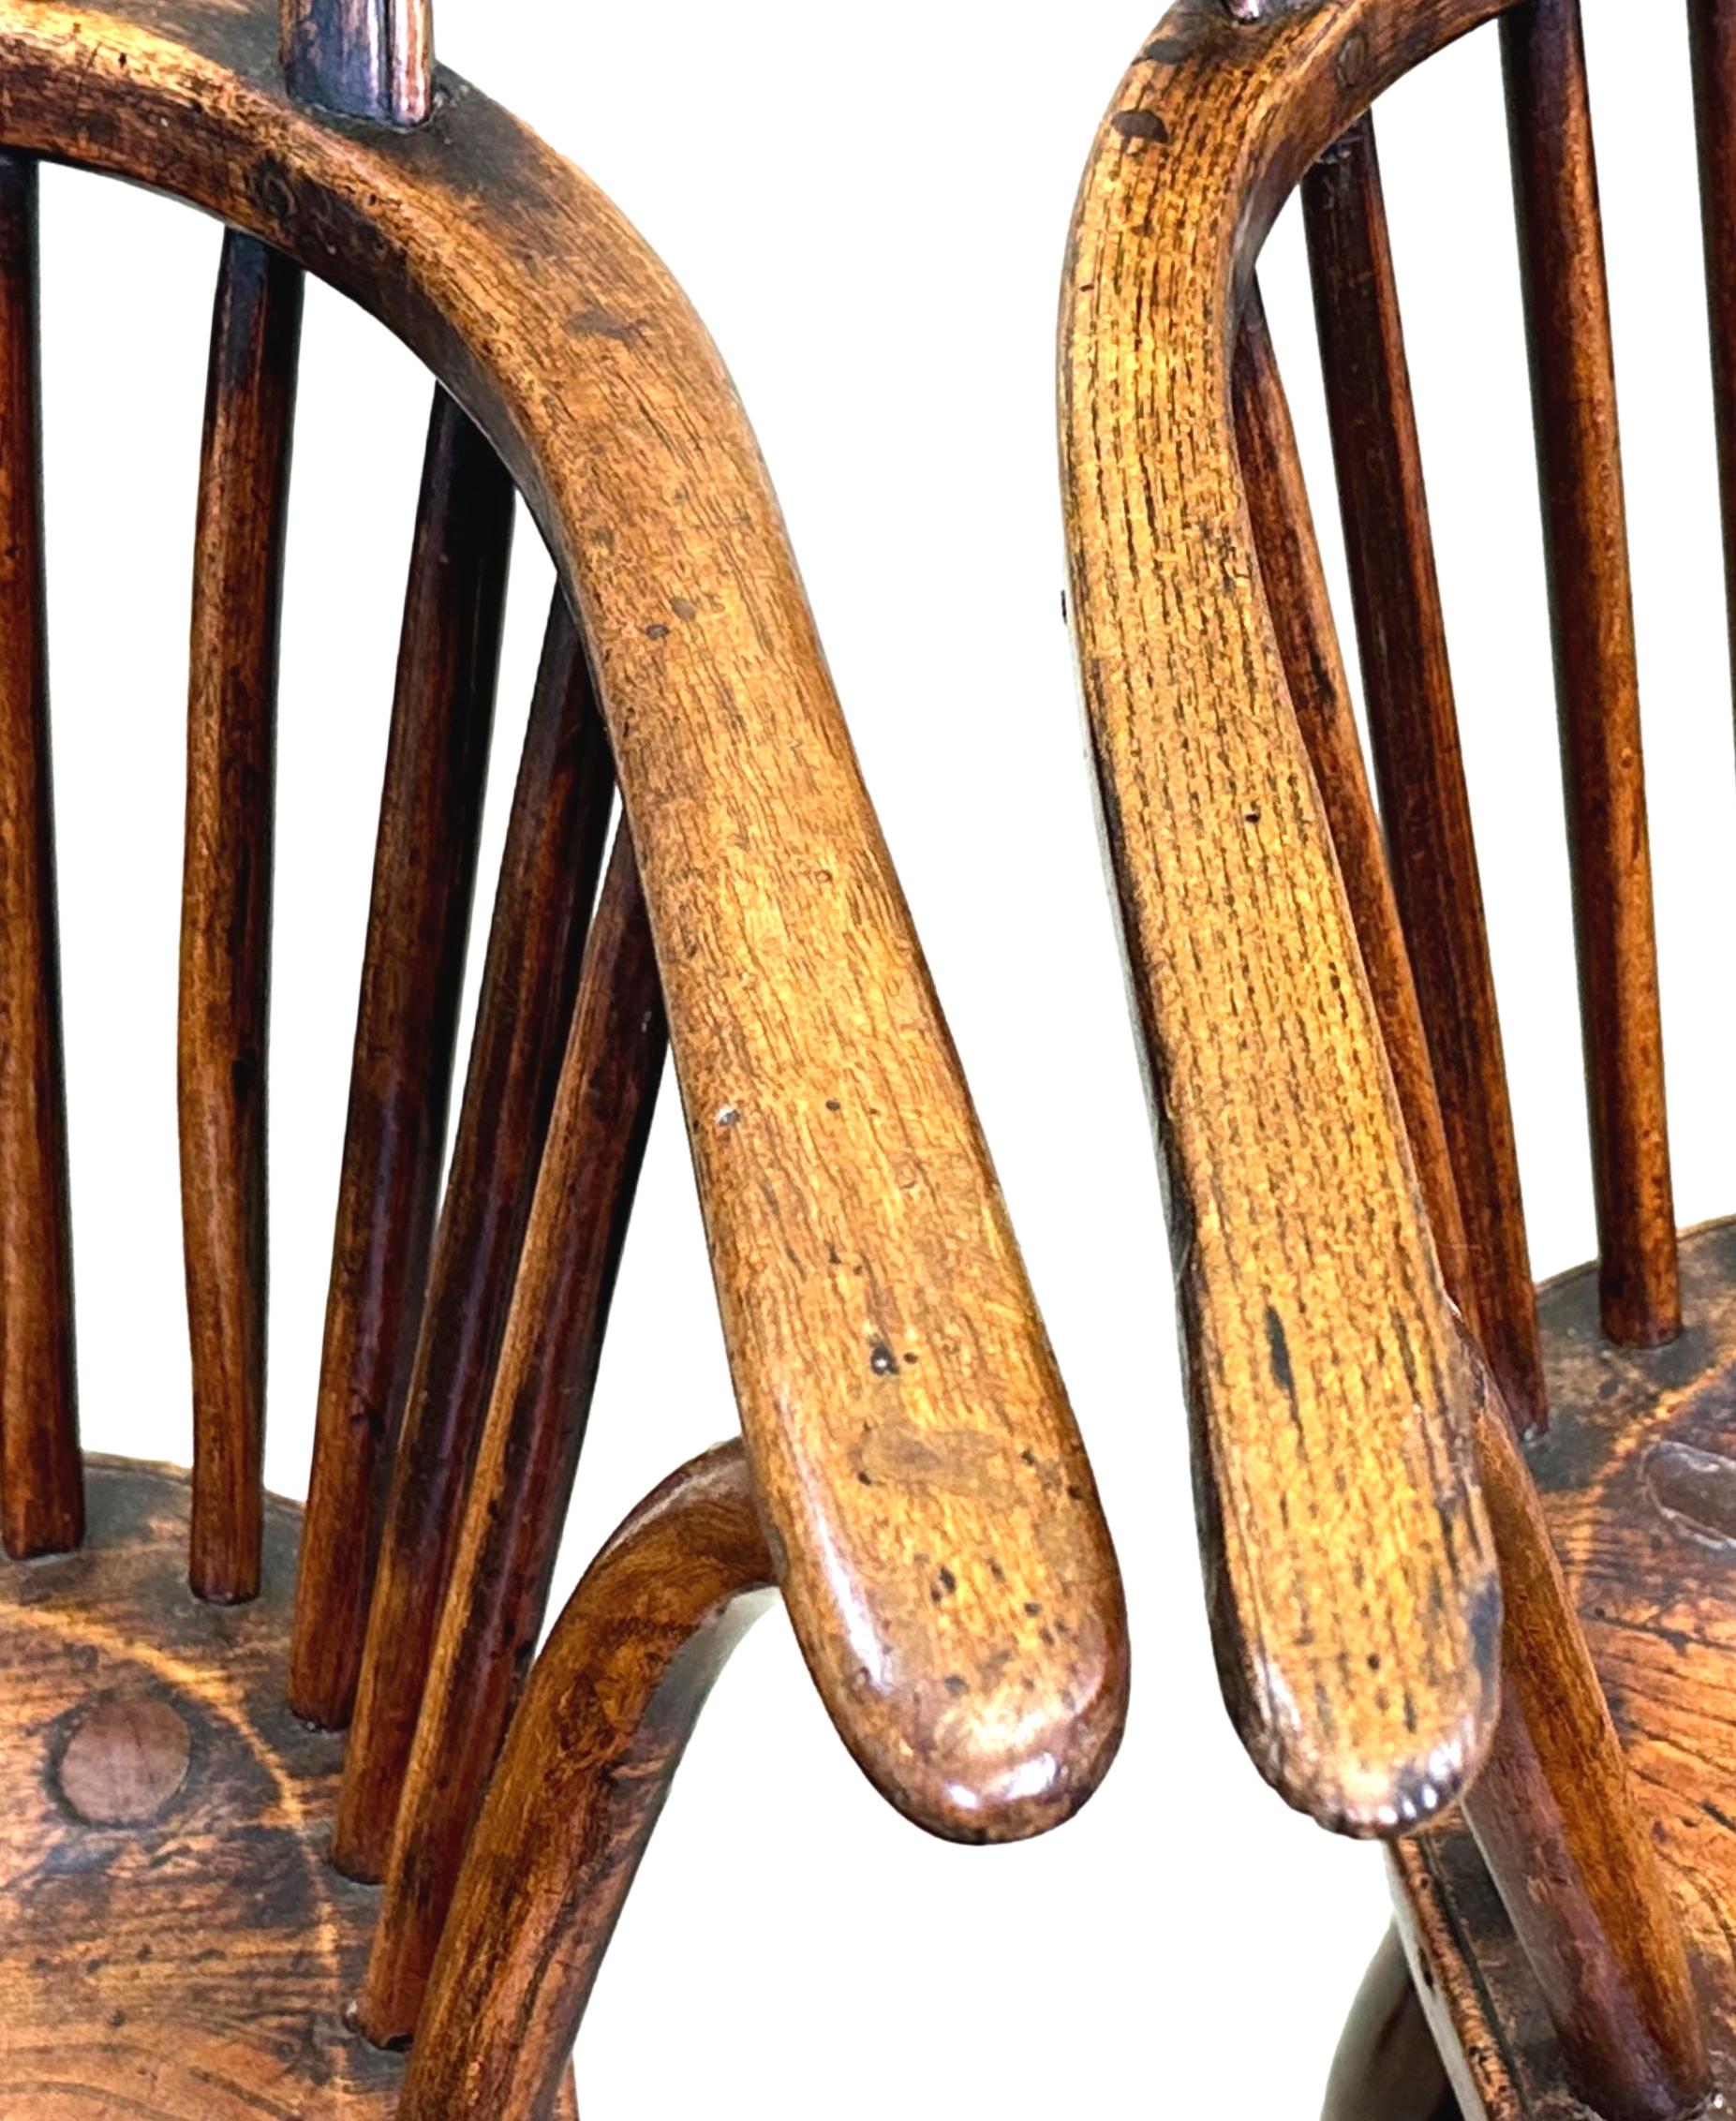 An Extremely Attractive Early 19th Century English Pair Of Ash And Elm Windsor Armchairs, Having Hooped Backs With Elegant, Attractive, Pierced Wheelbacks Over Well Figured Seats And Elegant Turned Legs United By Turned H Stretchers.


Windsor